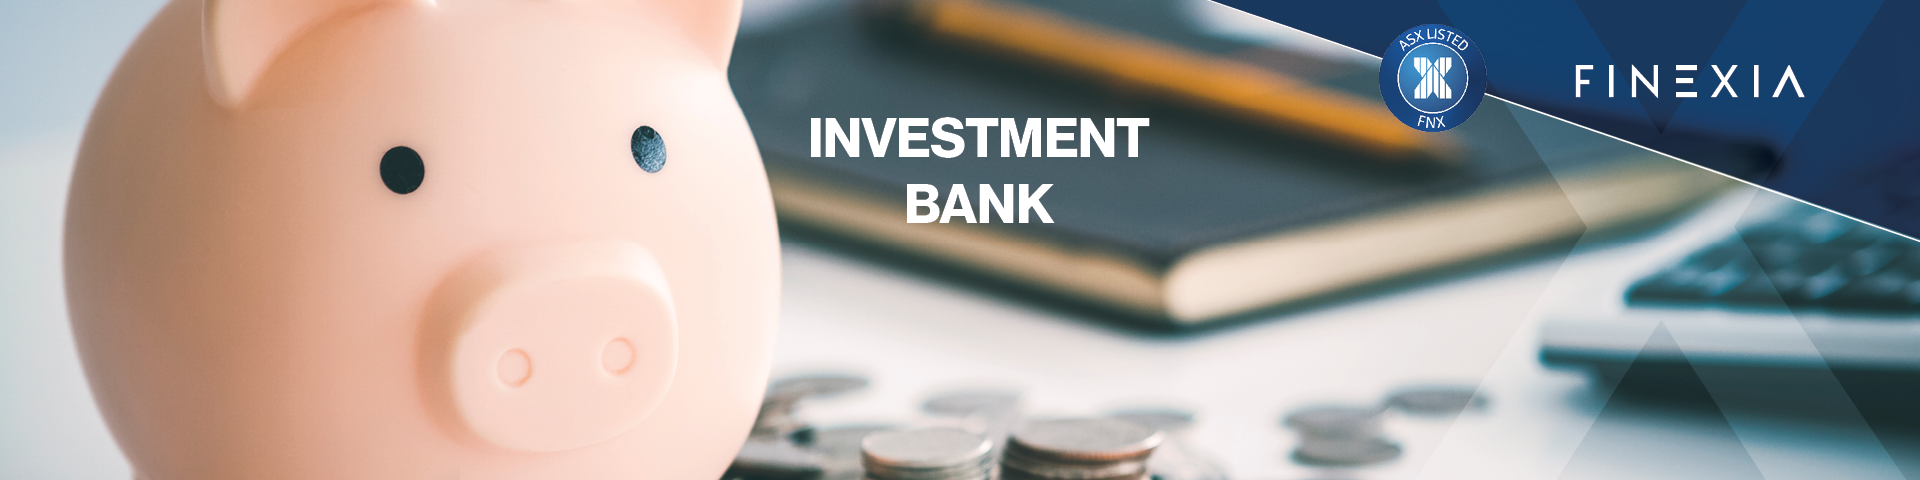 7 Essential Facts About Investment Banking in Australia